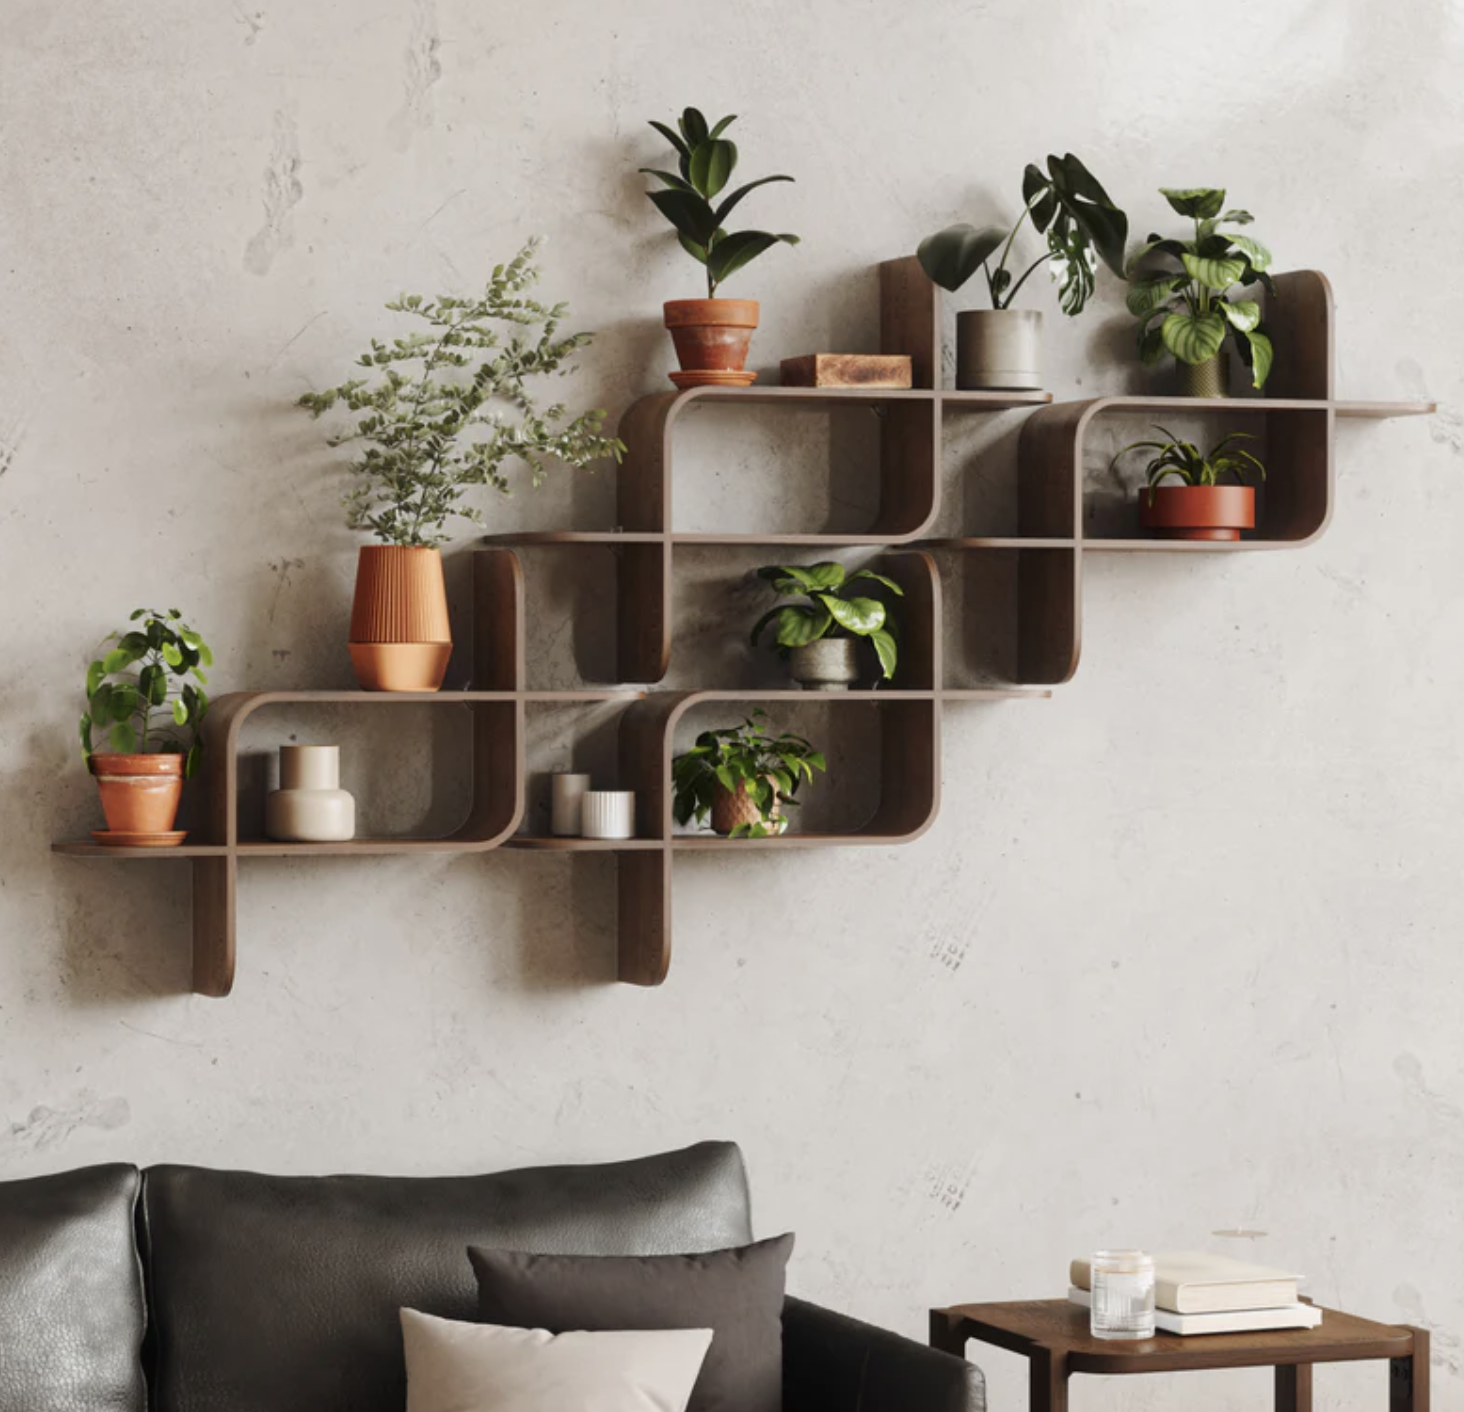 the shelves holding plants over a couch in a living room